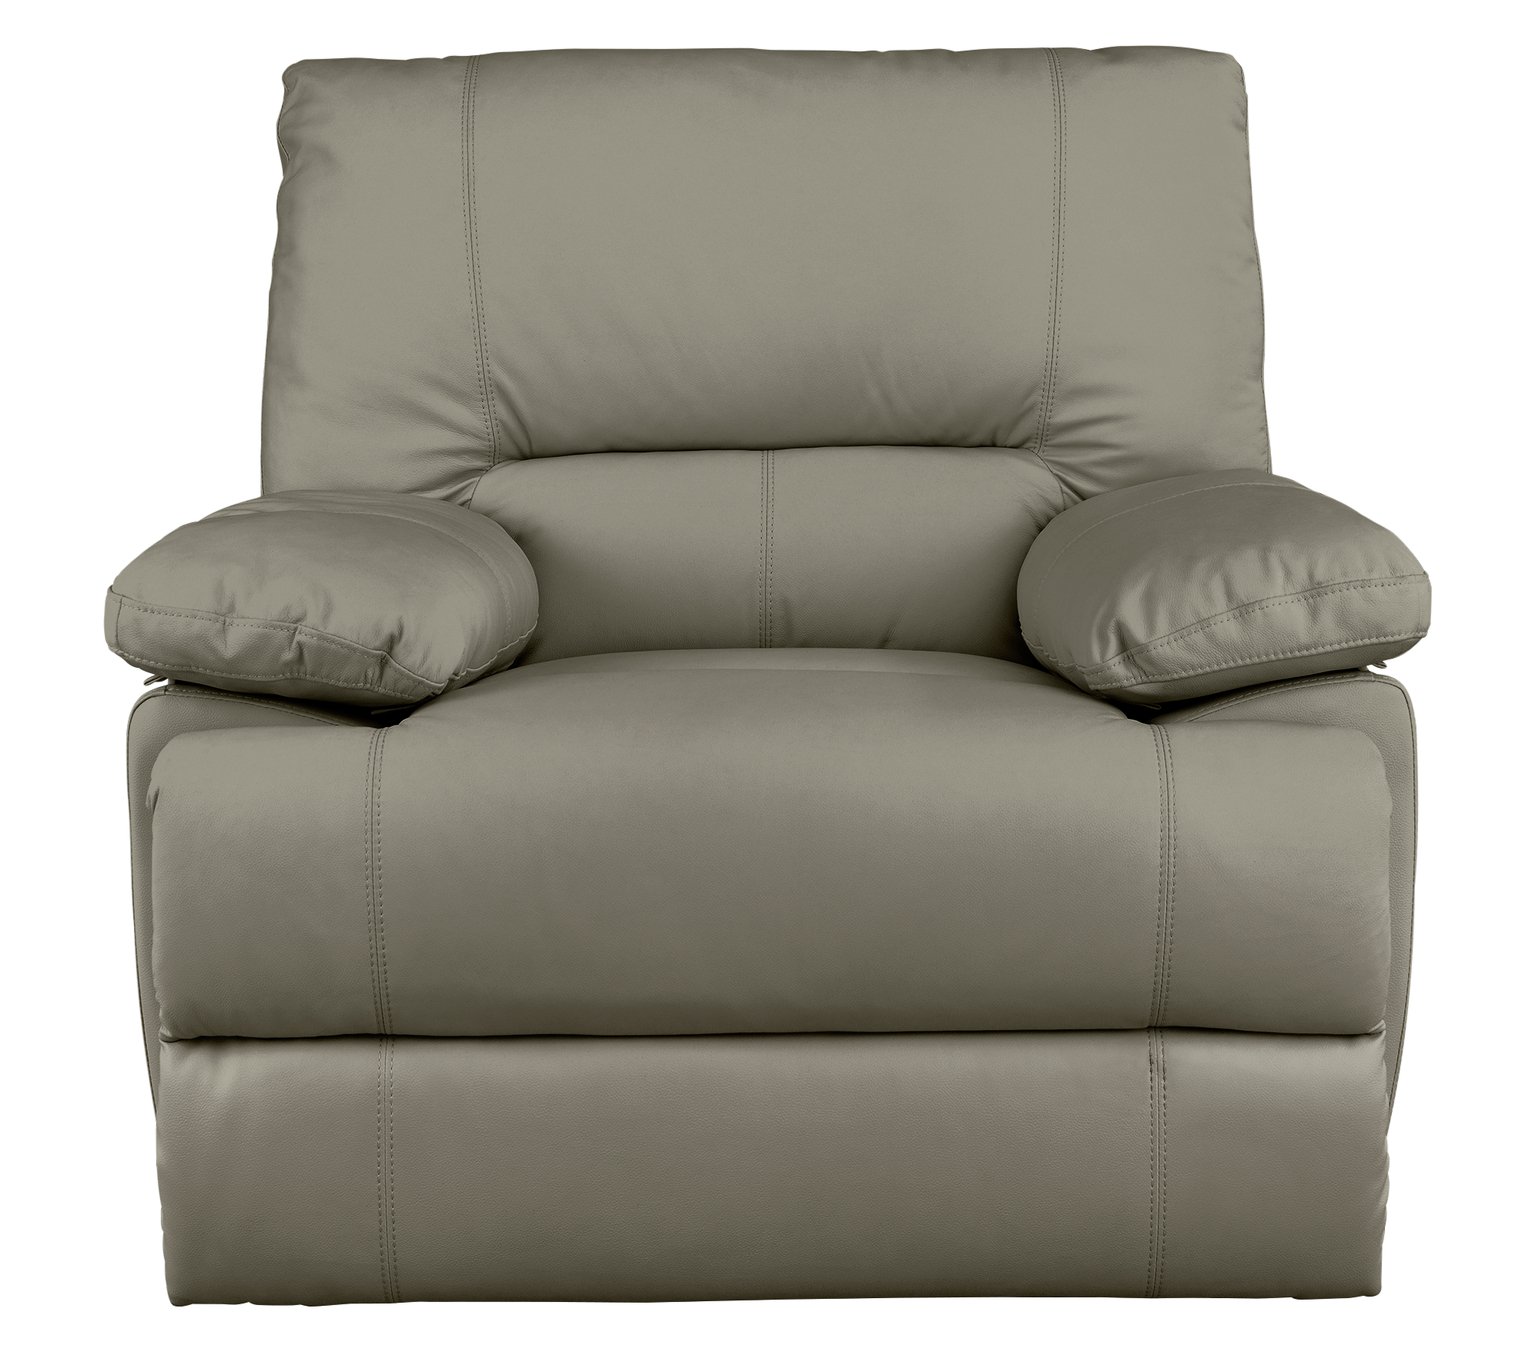 Argos Home Devlin Faux Leather Manual Recliner Chair - Grey